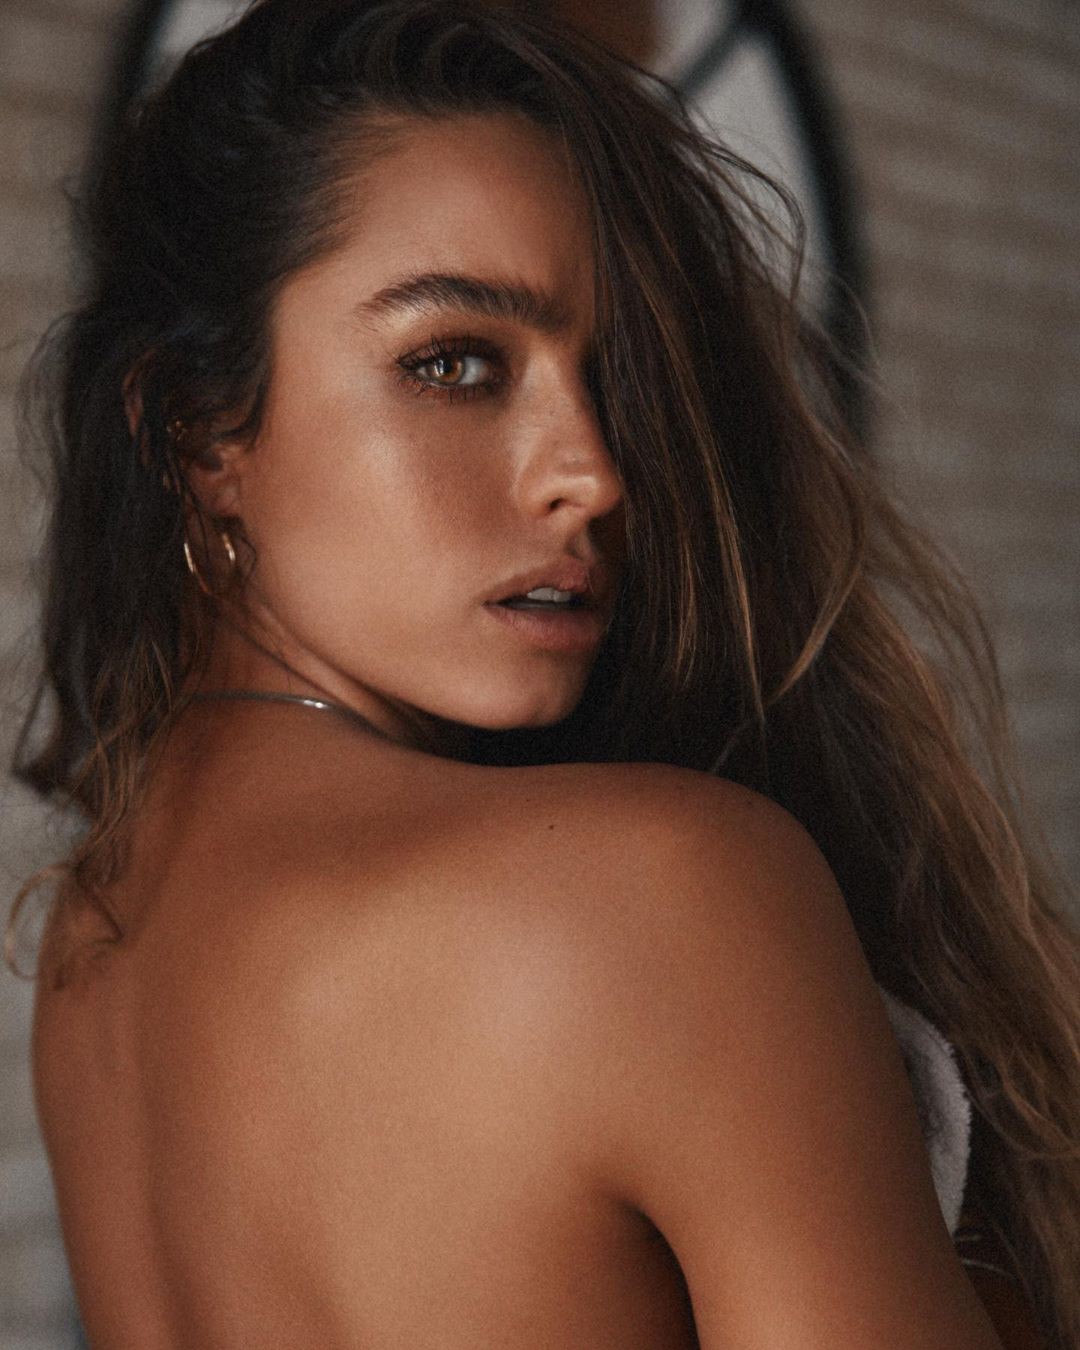 Fabulous Style Sommer Ray Pictures Insta: Sommer Ray,  Instagram girls,  instagram profile picture,  instagram models,  most liked Instagram photo,  Instagram photos,  Super Hot Sommer Ray  